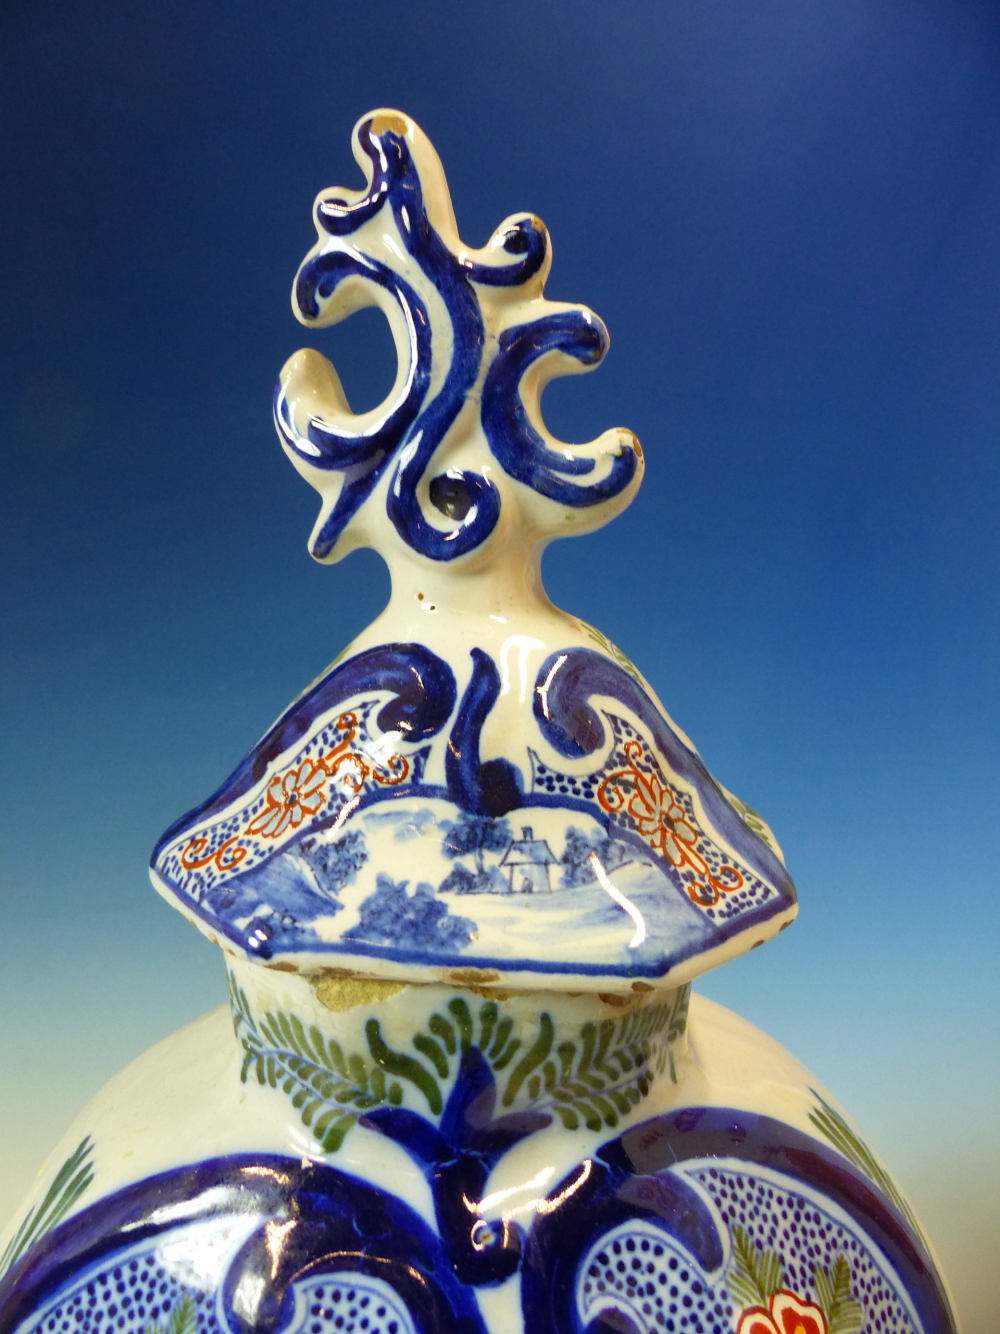 TWO 19th C. DUTCH DELFT POLYCHROME VASES AND COVERS OF FLATTENED BALUSTER SHAPE, ONE PAINTED WITH - Image 9 of 14